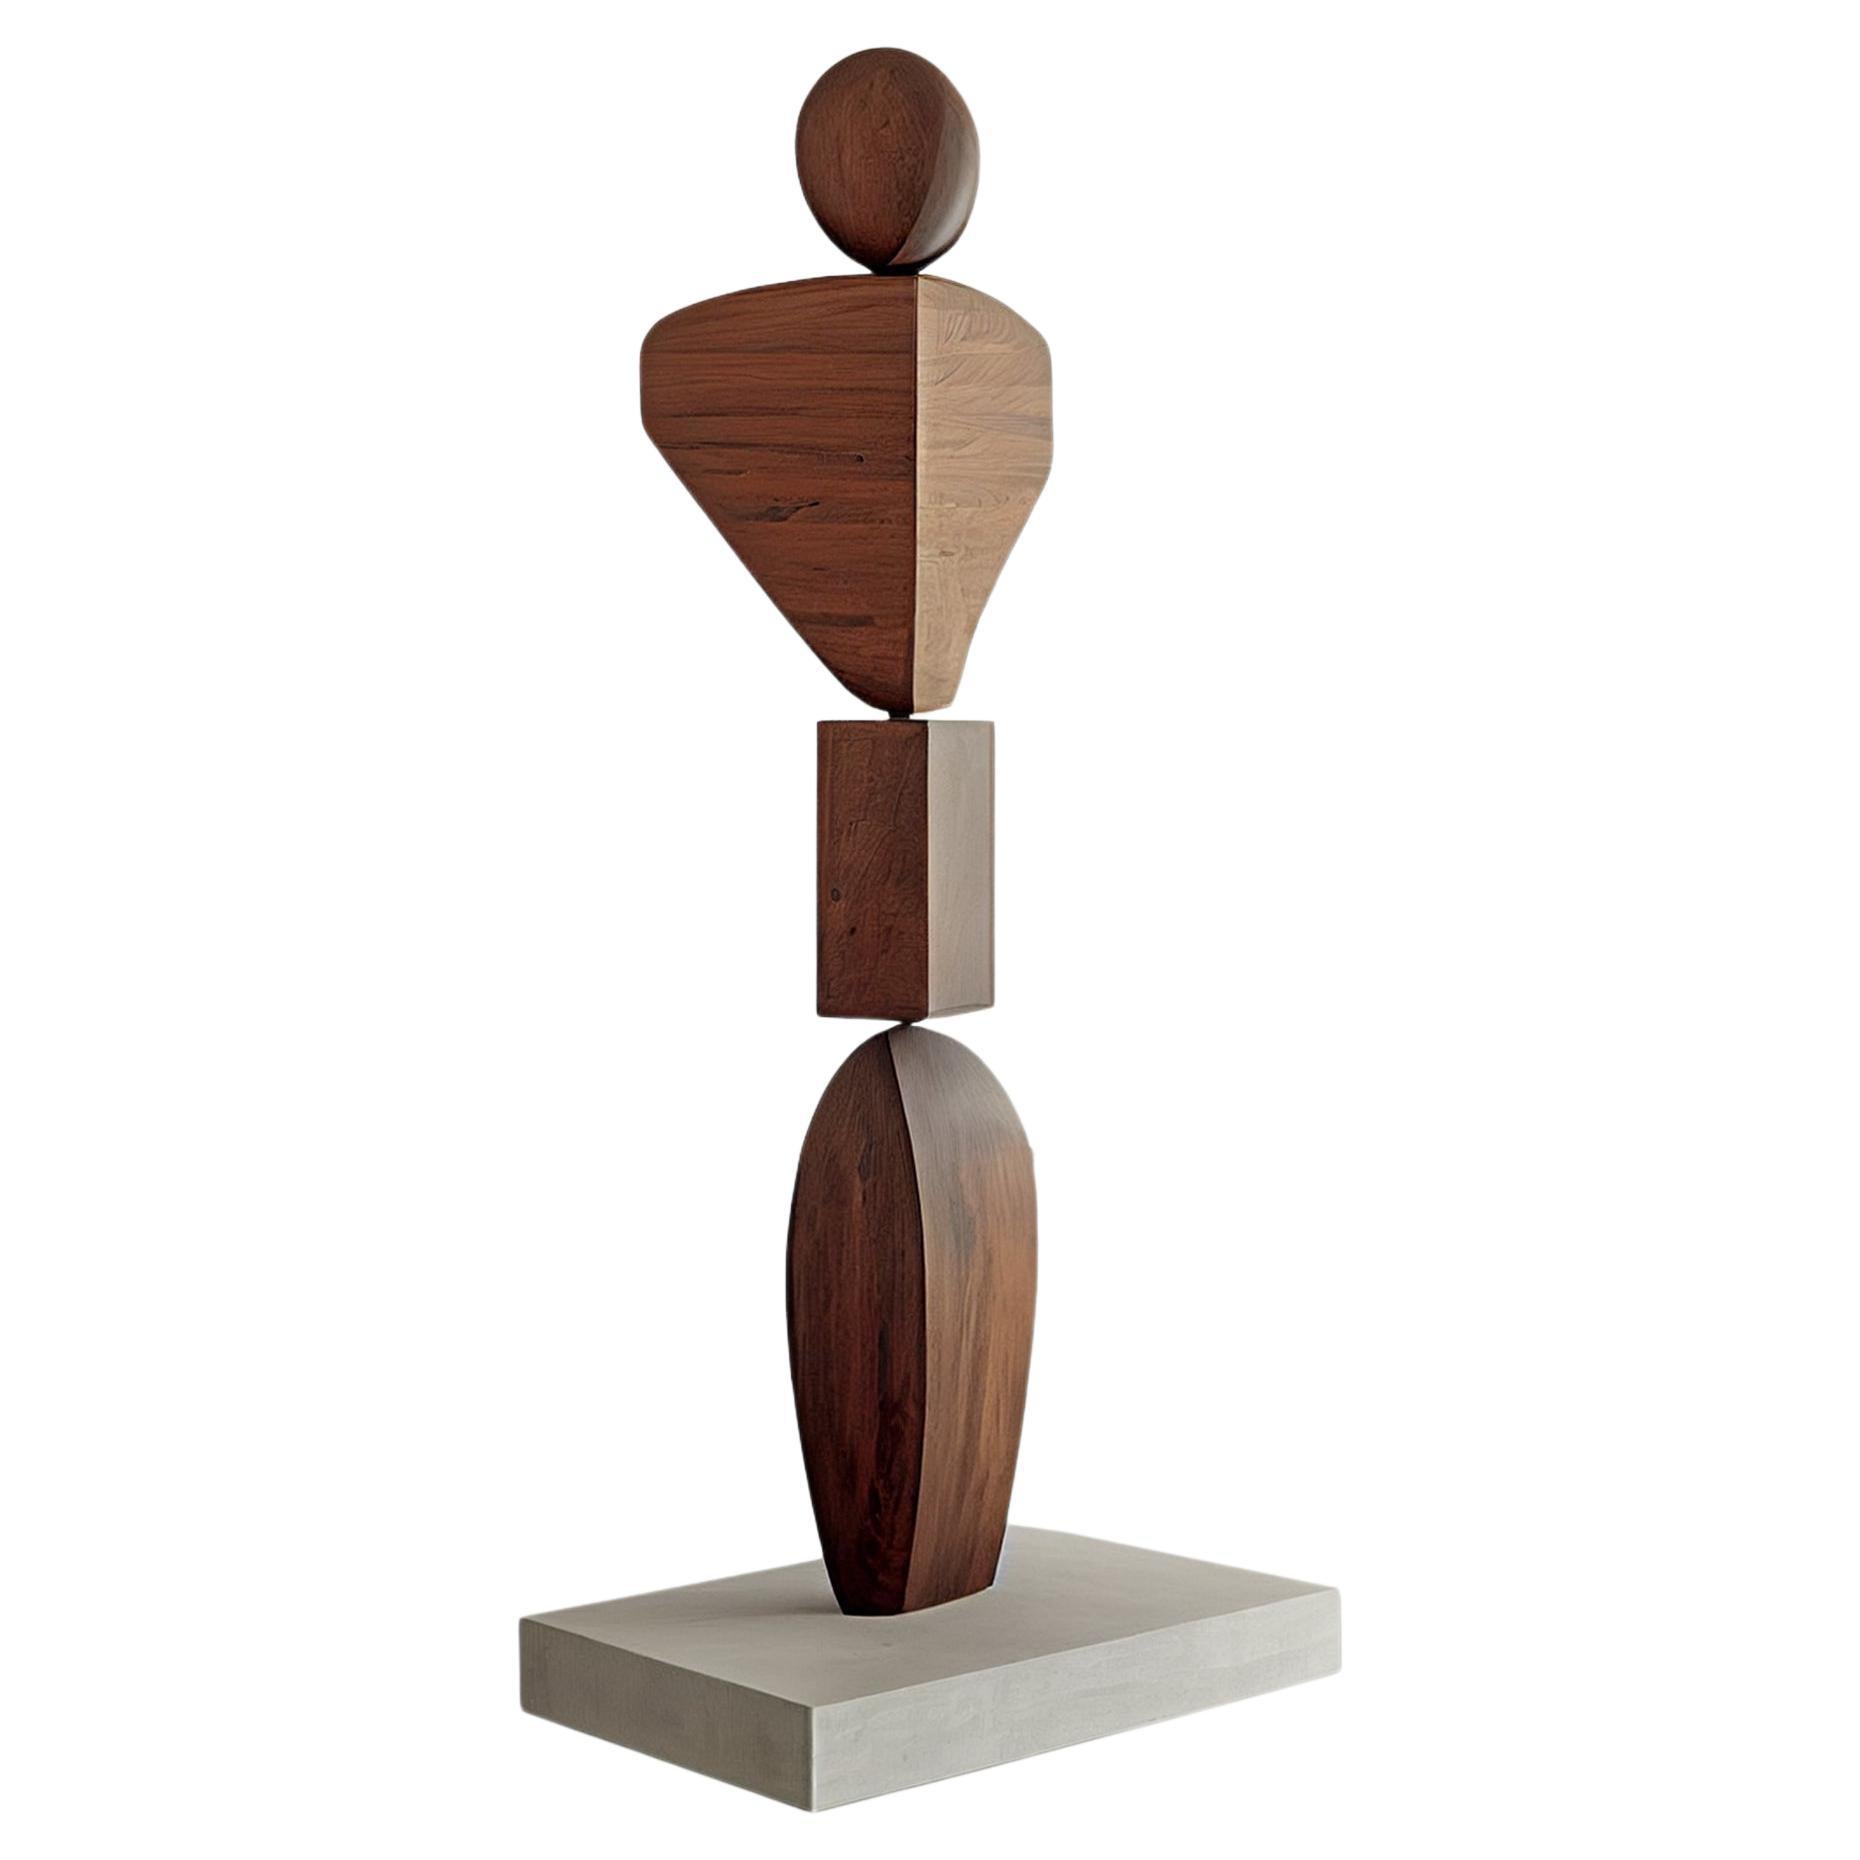 Abstract Modern Wood Sculpture, Still Stand No7 by Joel Escalona